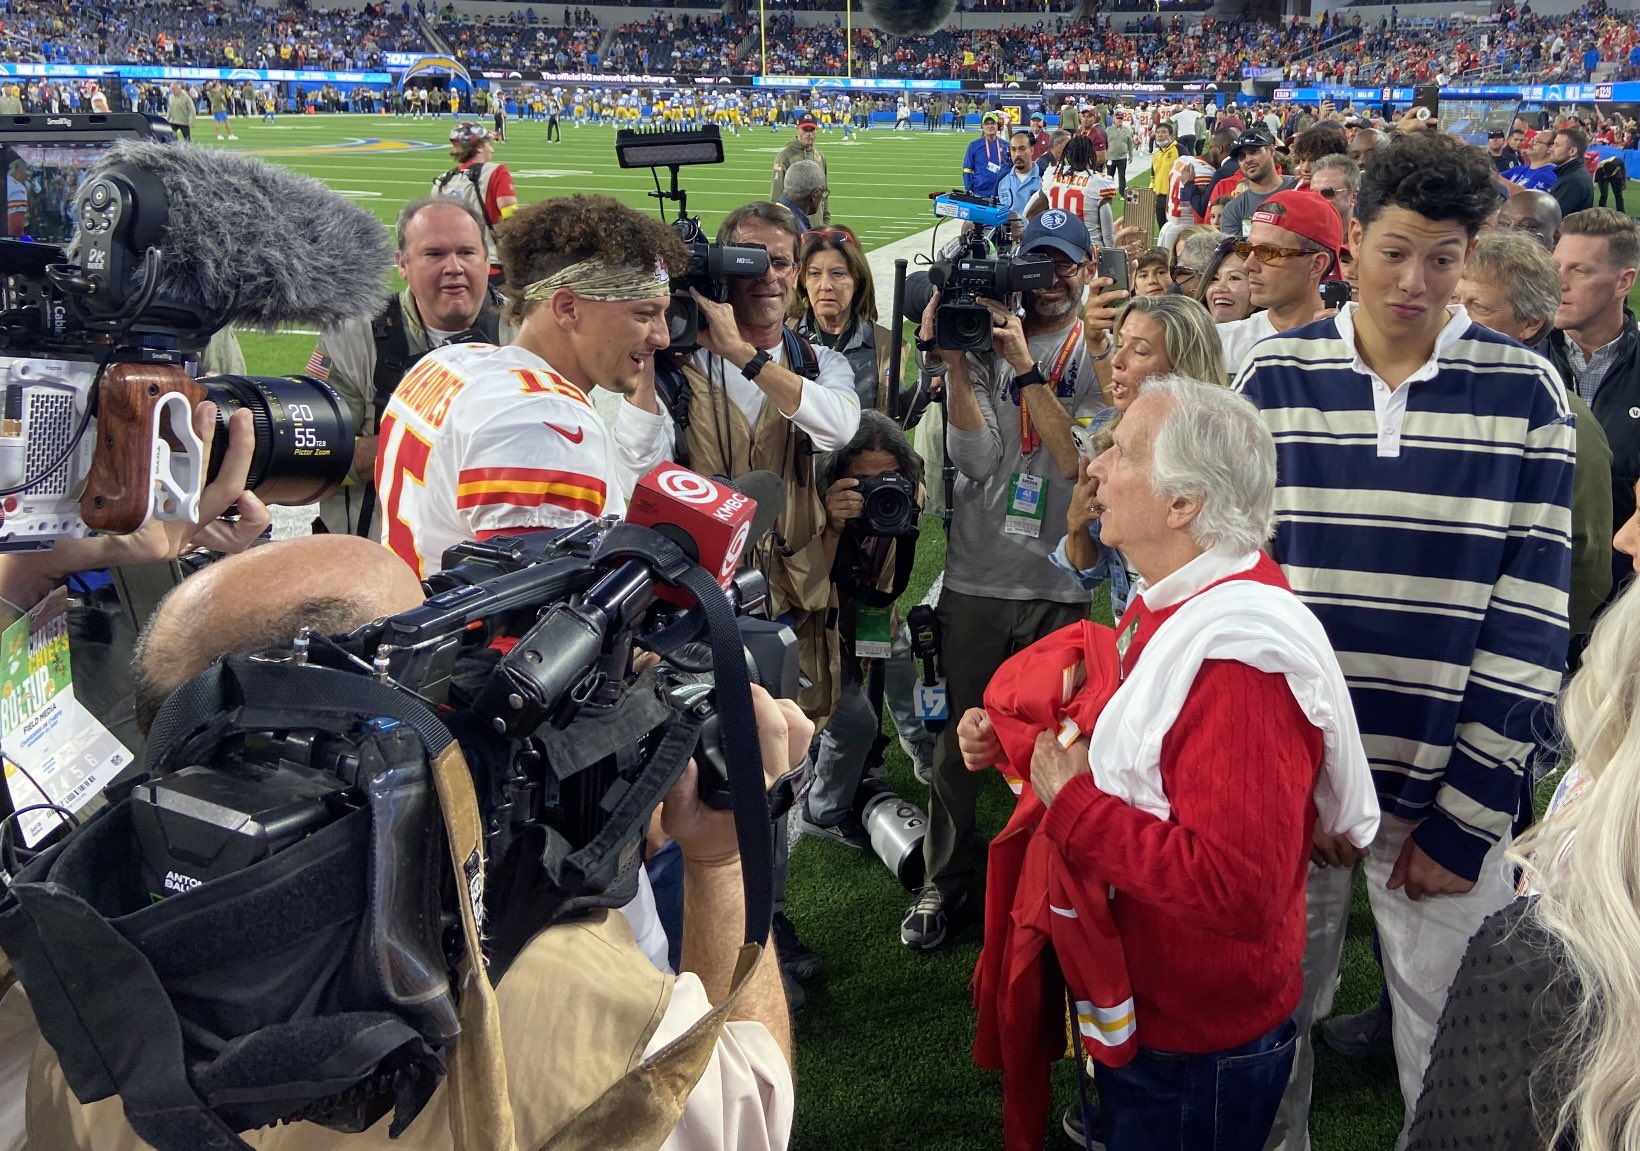 Kansas City Chiefs’ Patrick Mahomes meets superfan Henry Winkler ahead of SNF game vs Los Angeles Chargers